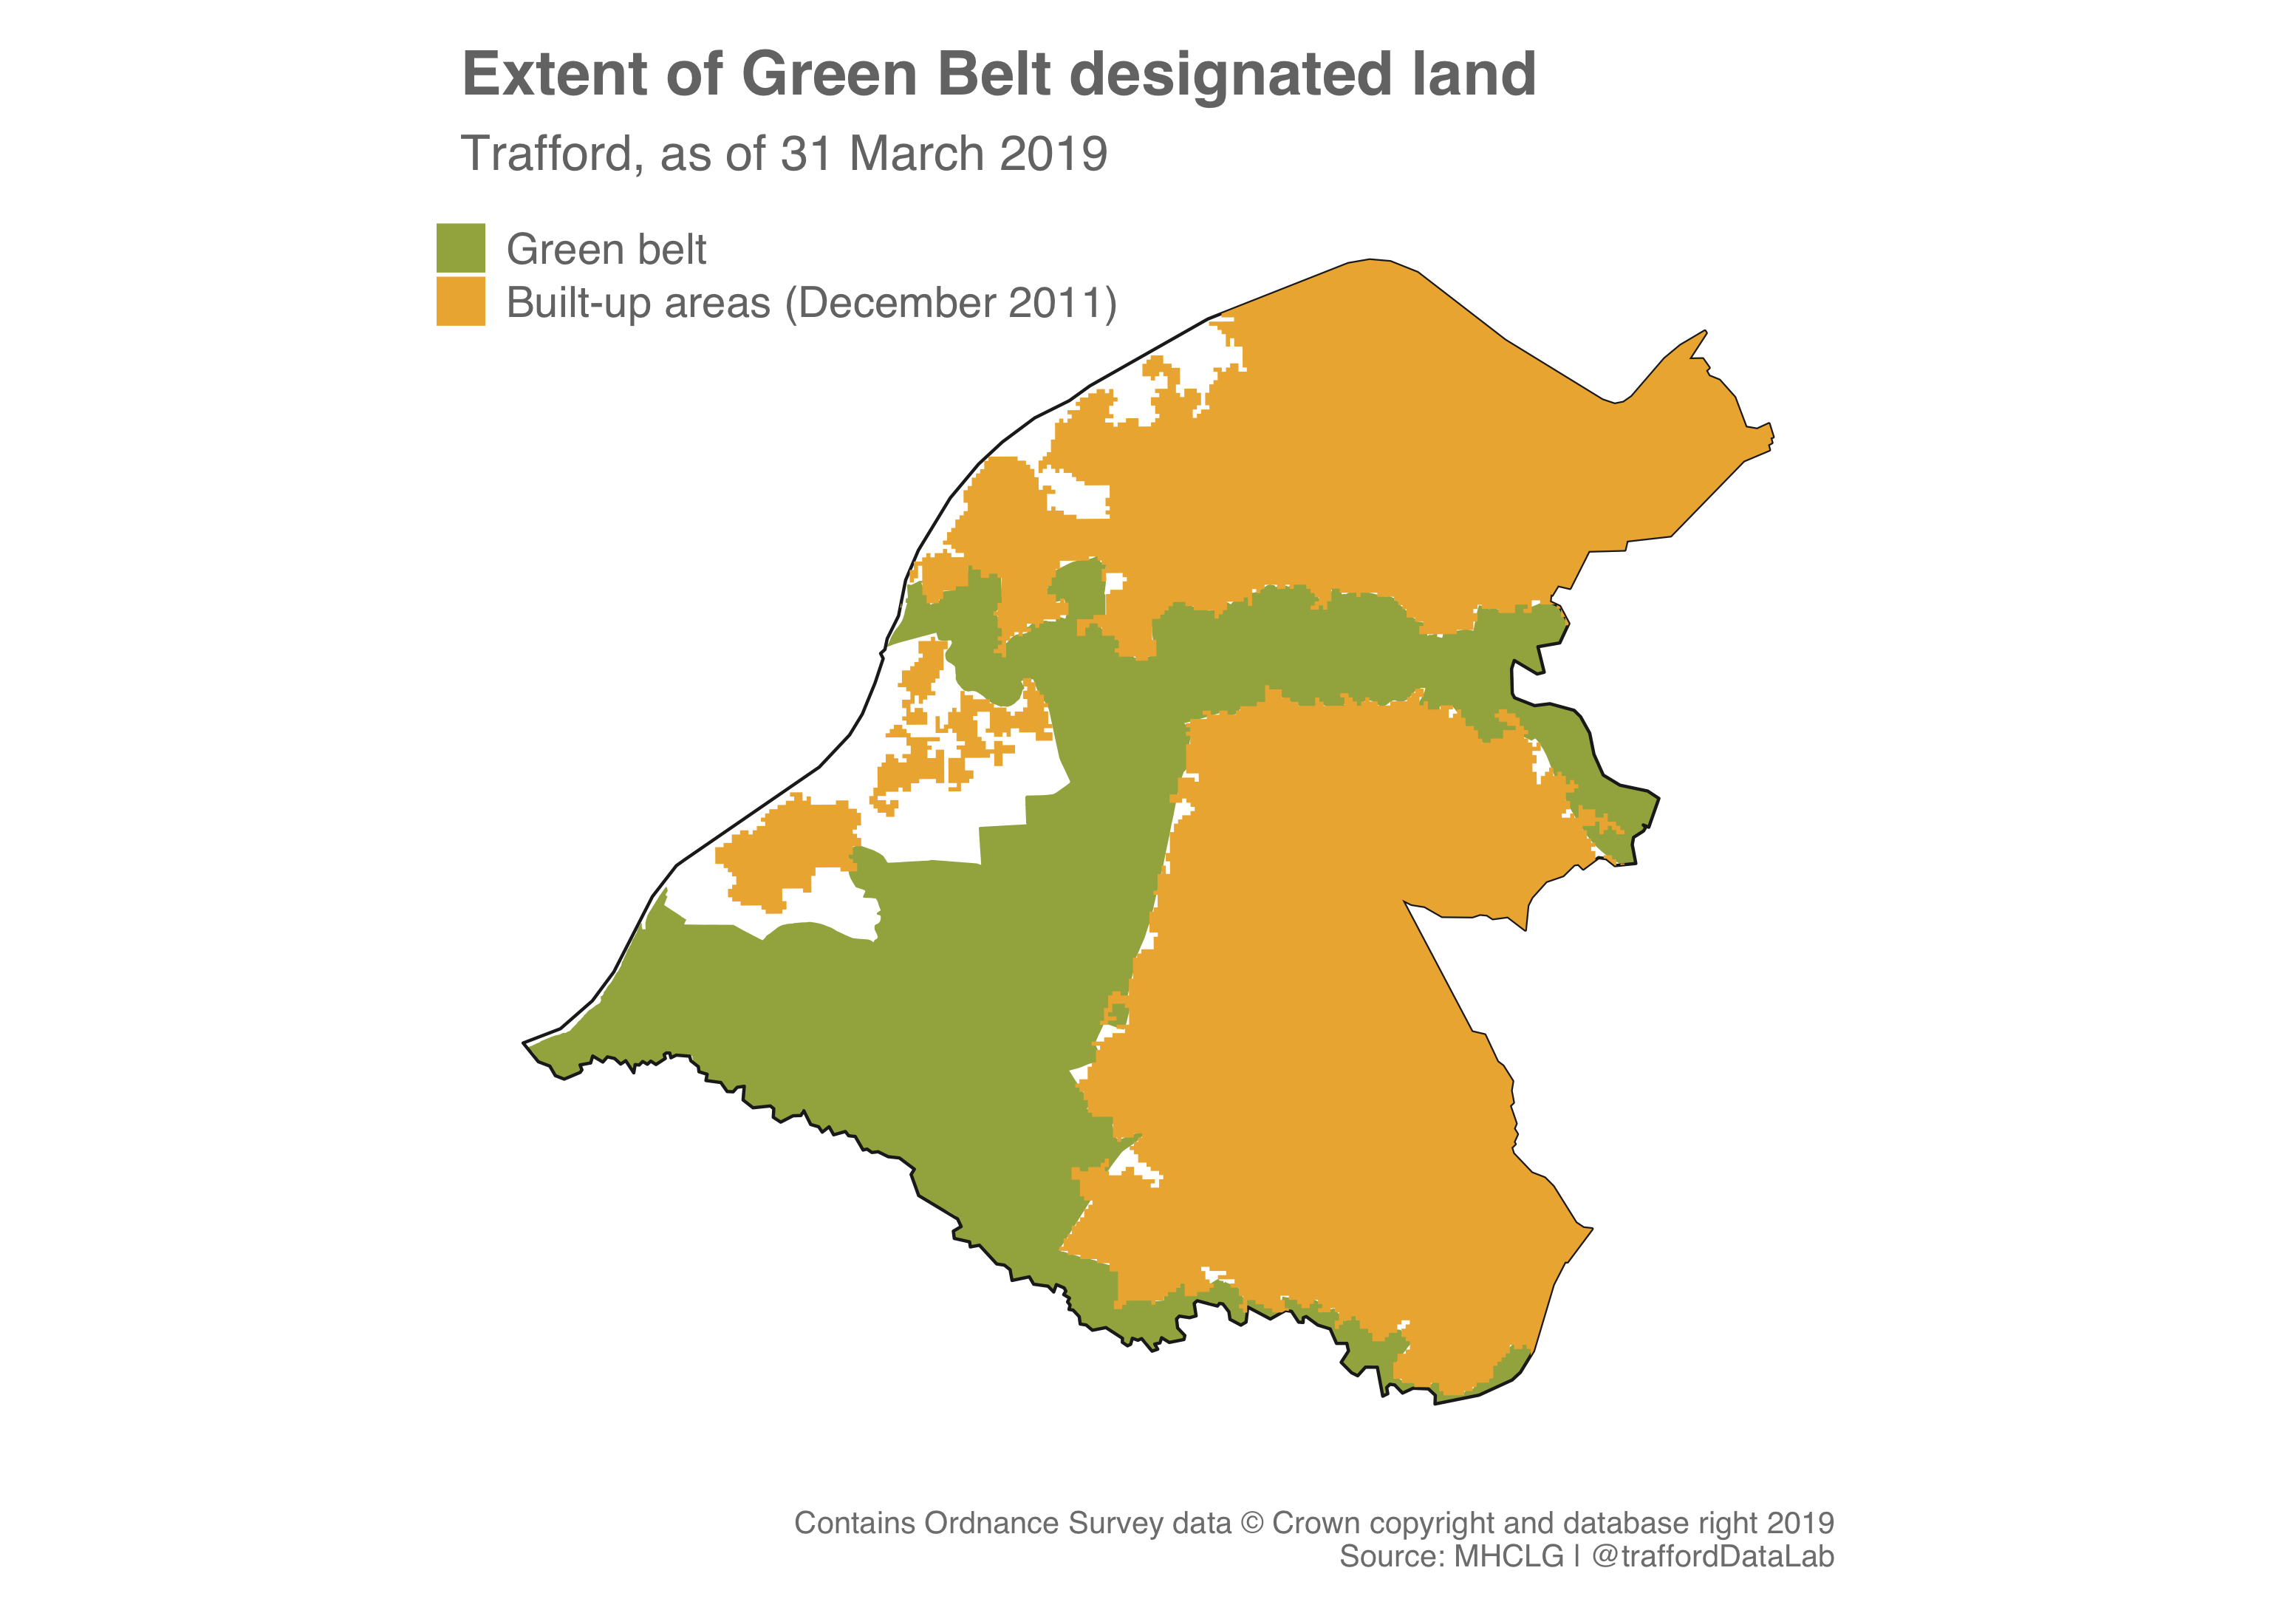 Map showing the extent of Green Belt designated land in Trafford, March 2019.